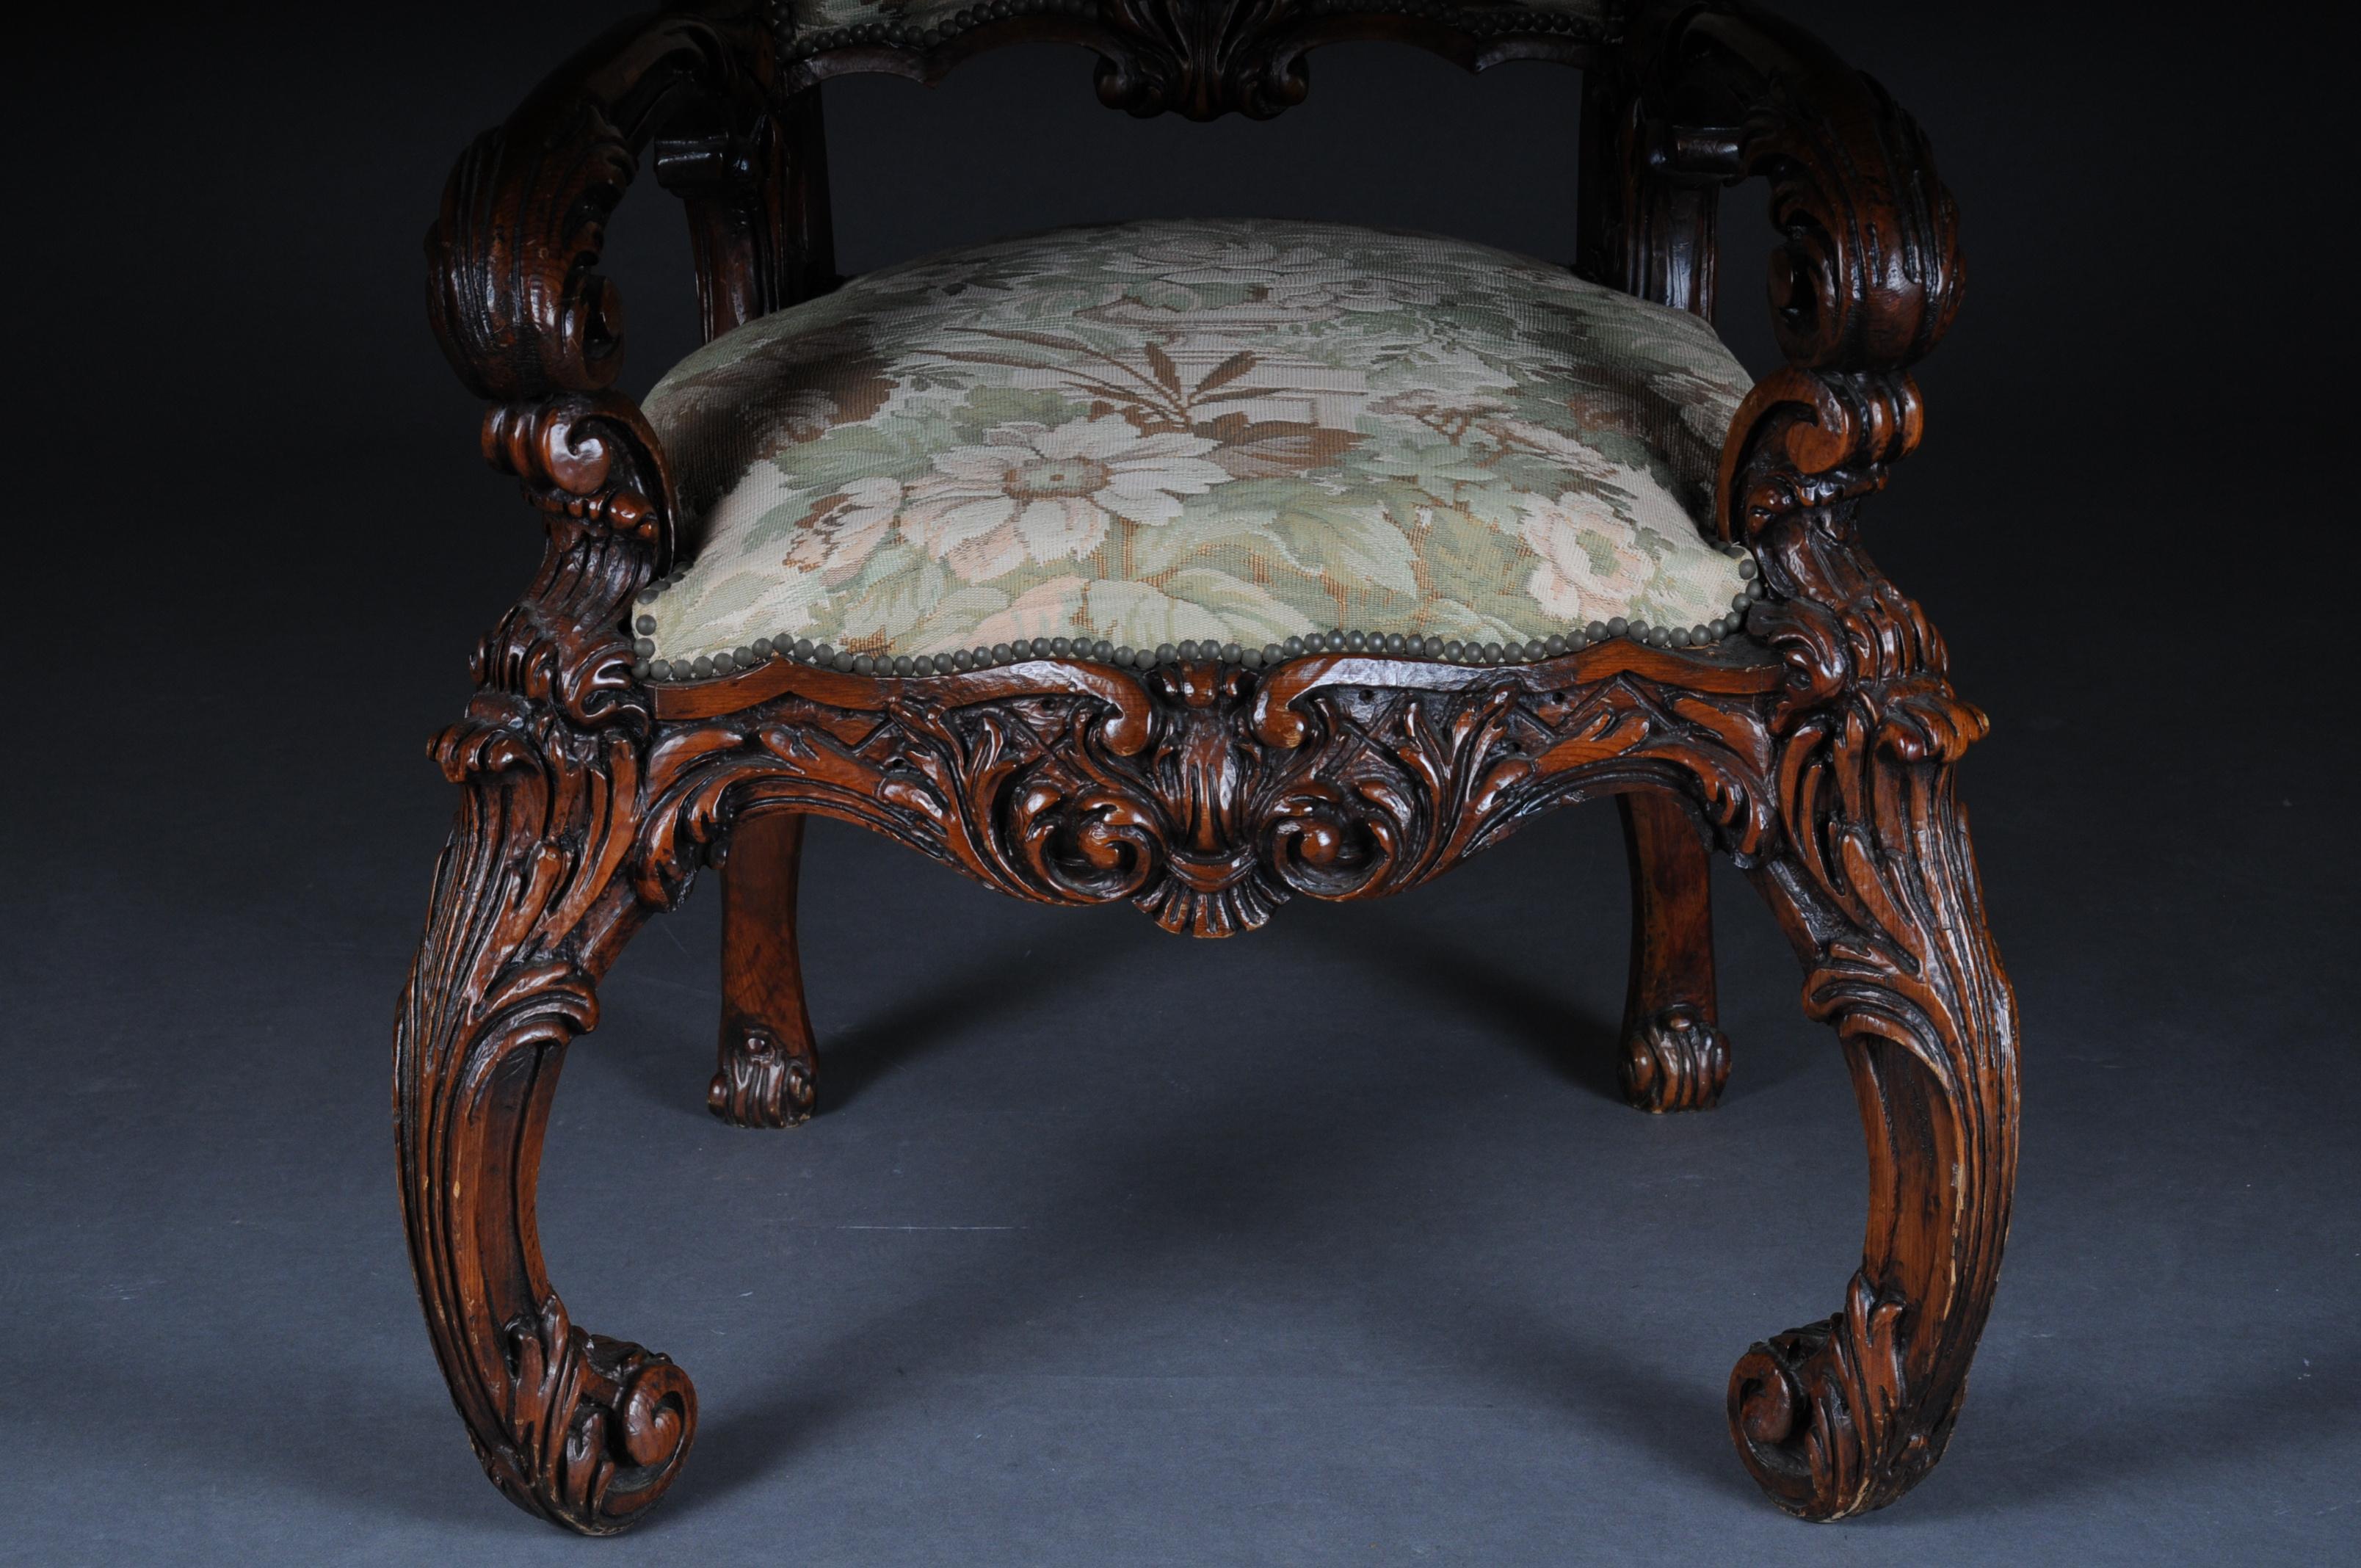 20th century Venetian Rococo throne armchair / chair walnut.
Solid walnut. Pronounced rising backrest. The seat and backrest are processed with historical, Classic upholstery. An absolutely high quality fabric cover. This model is exceptional in